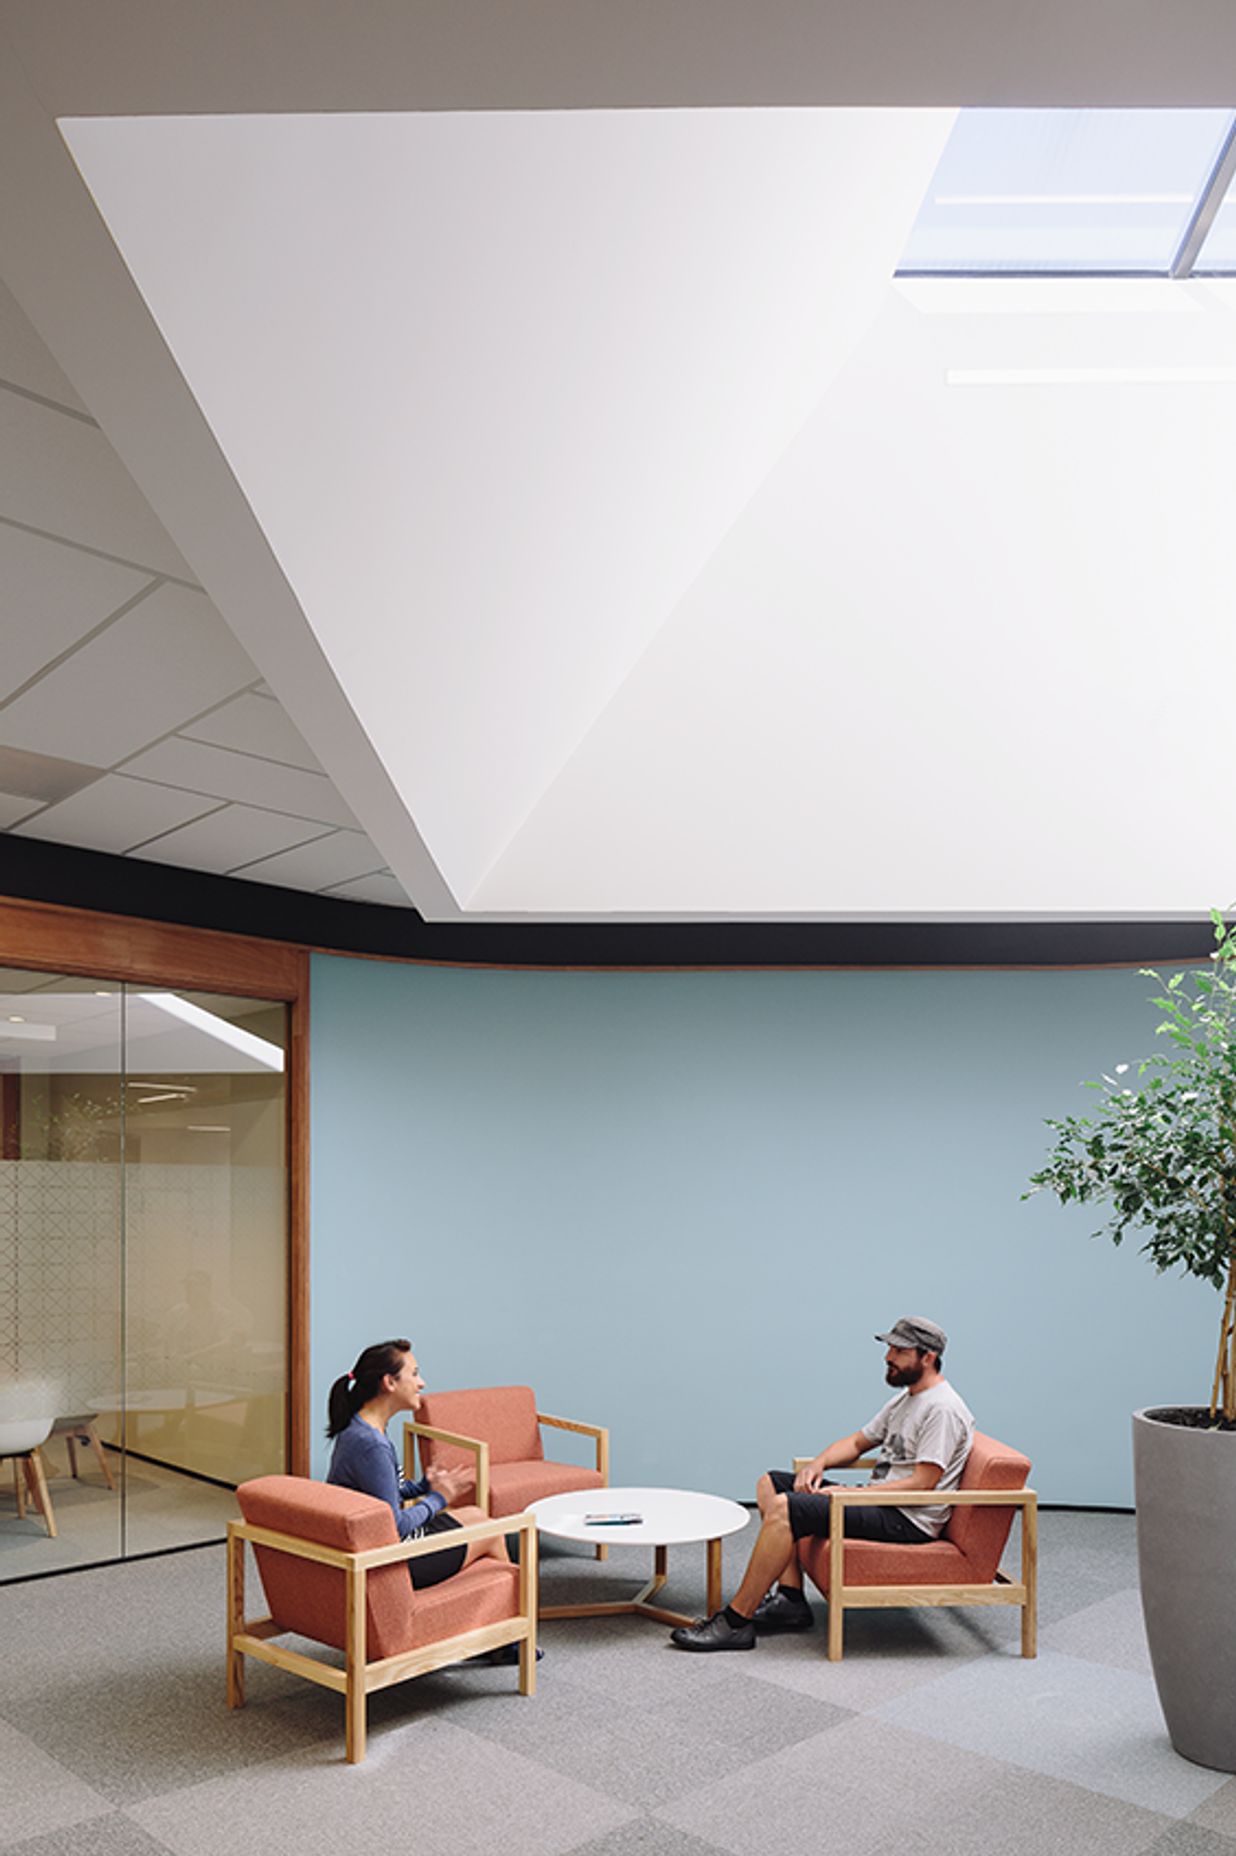 A combination of collaborative, meeting and focus spaces has been provided; whether that be in an enclosed meeting room, booth spaces or open, loose seating.